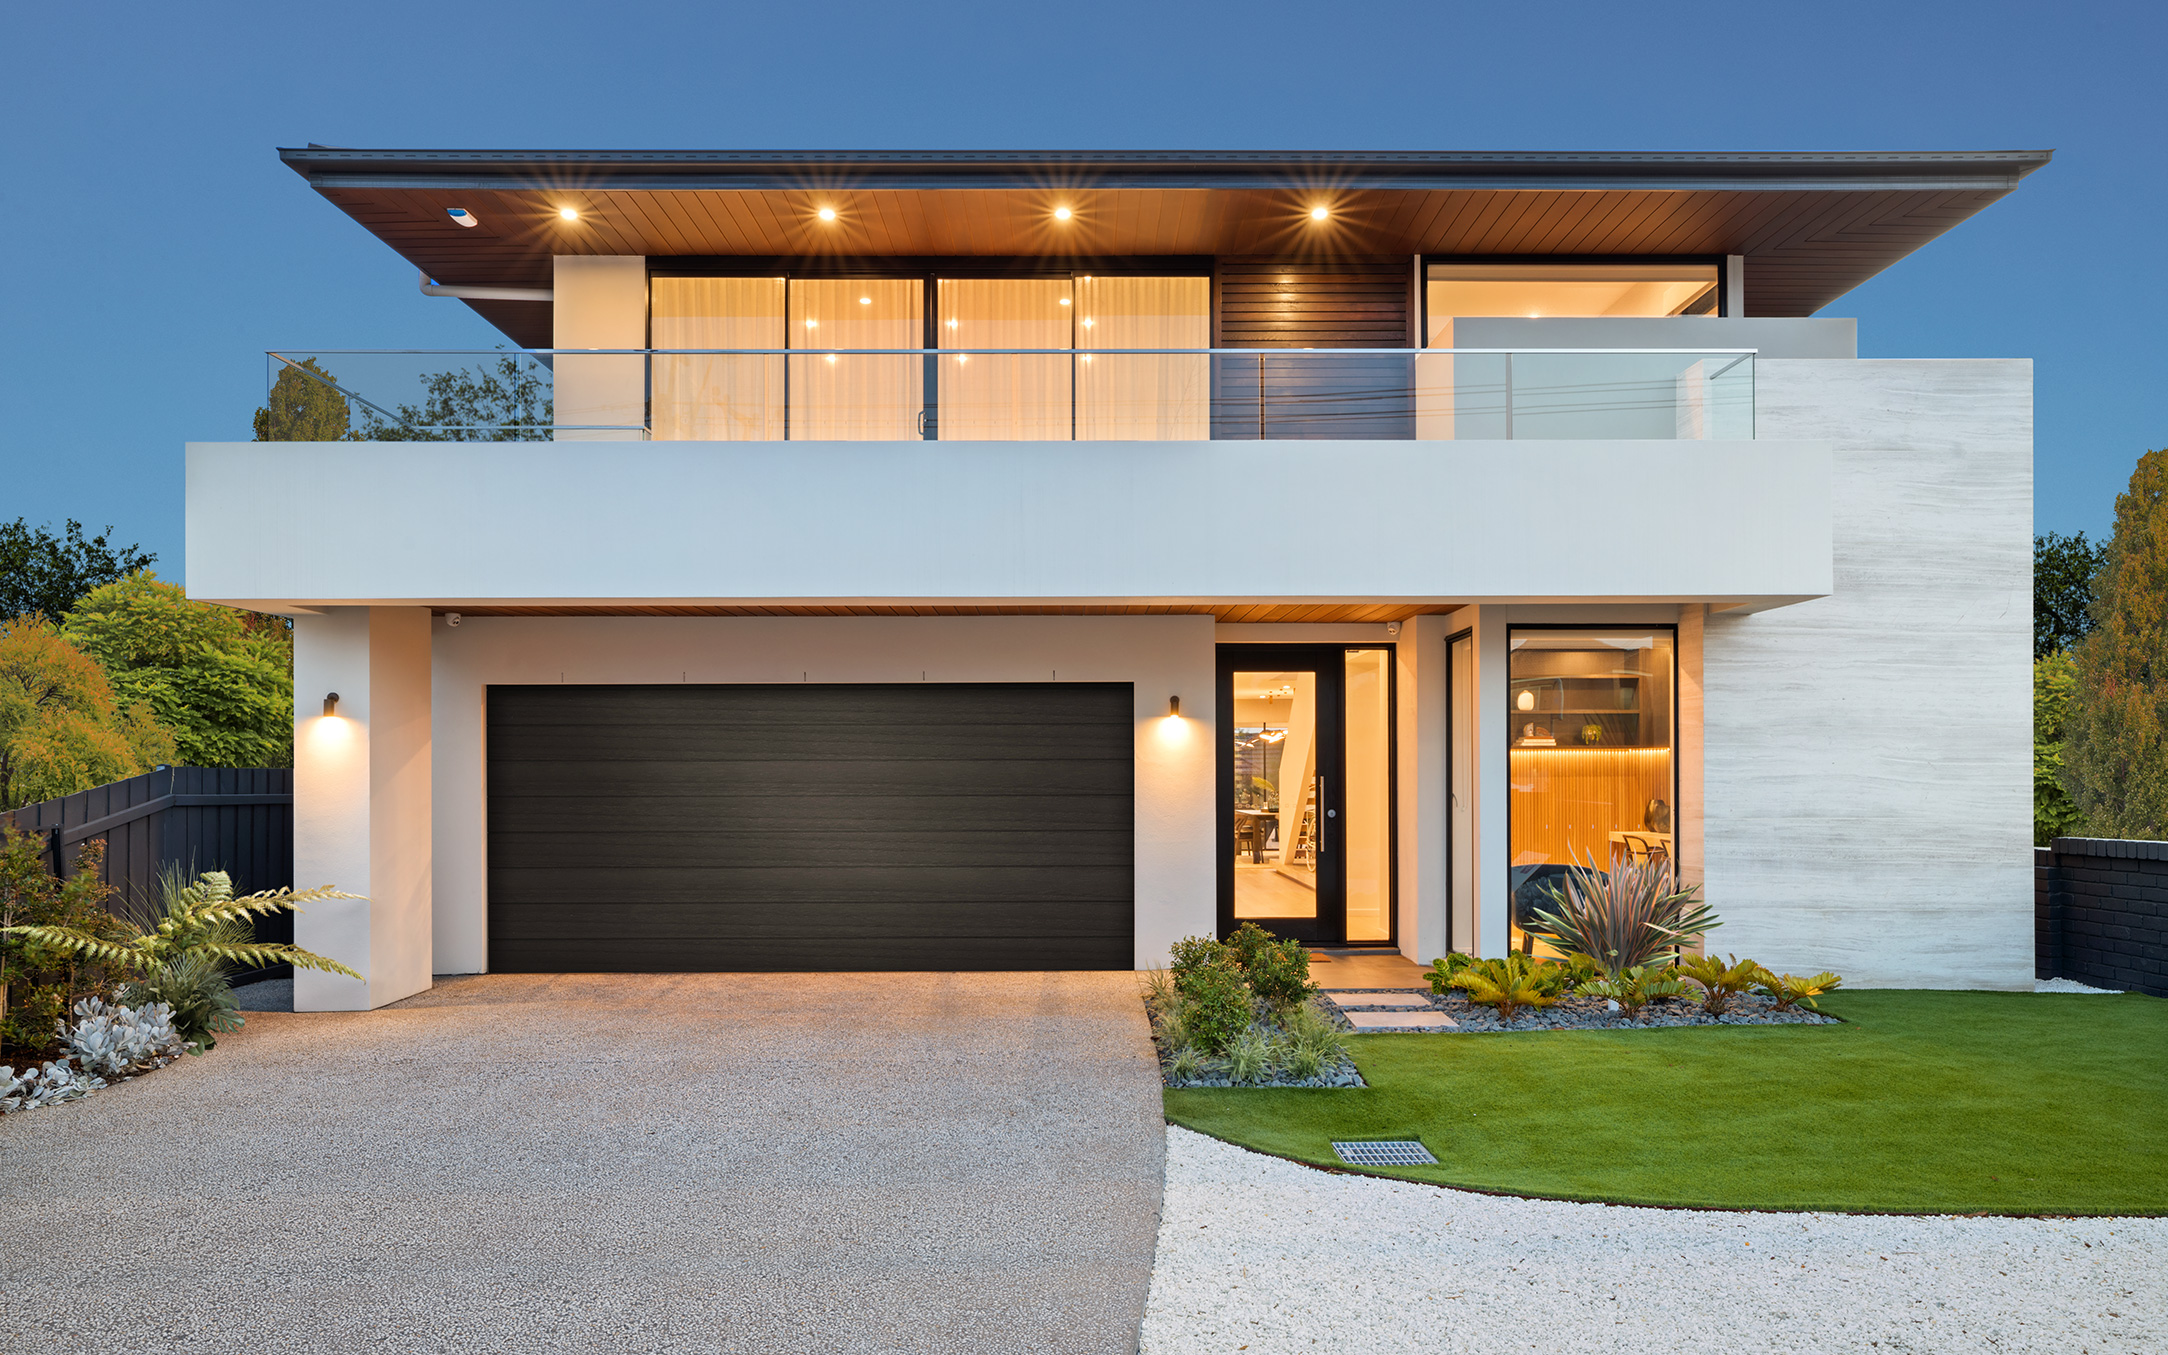 How to nail the façade design for your new home